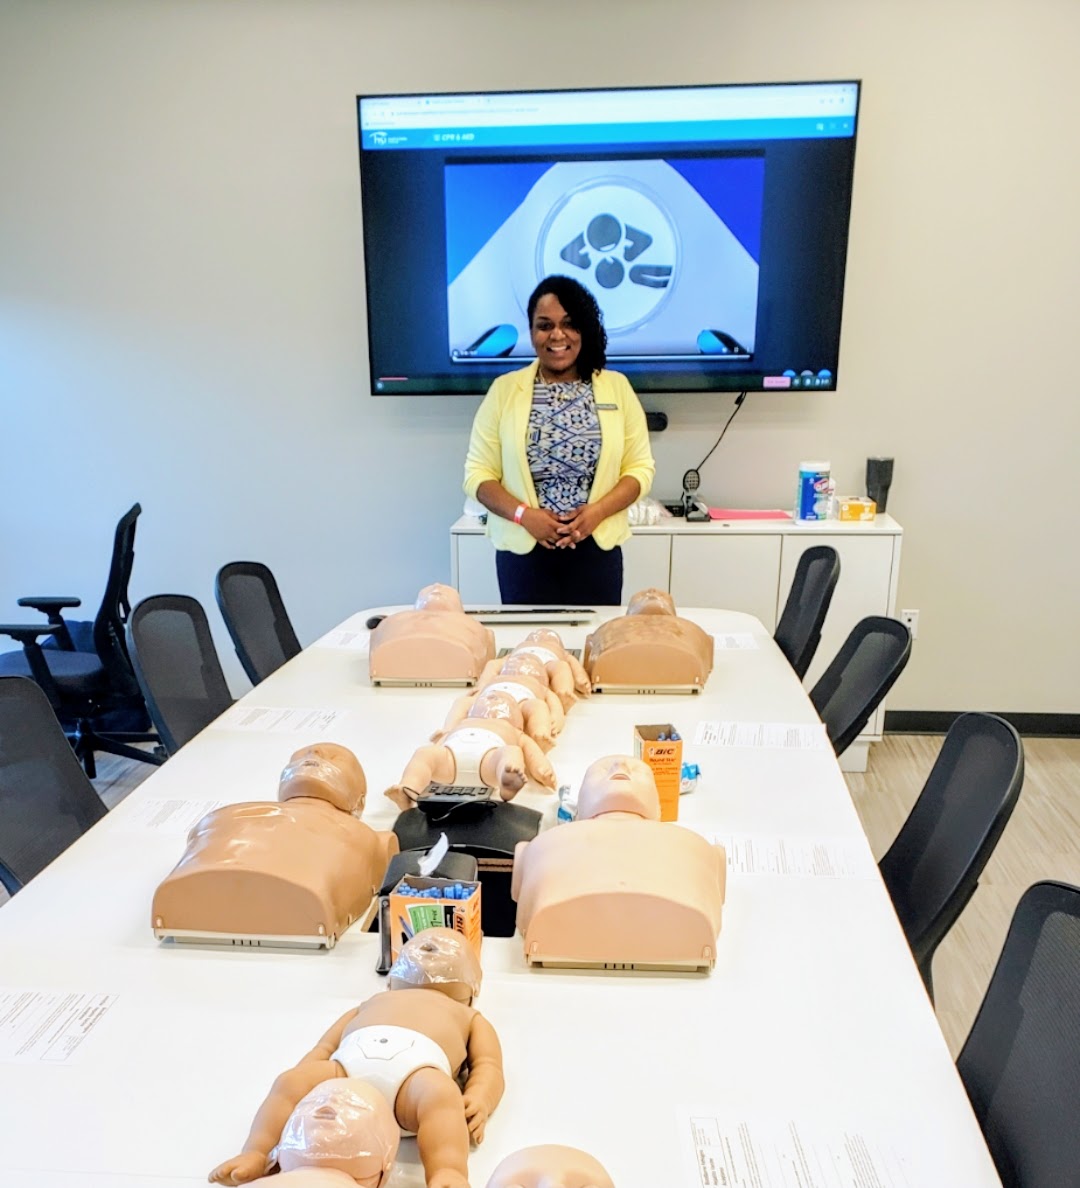 Start a CPR Training Business in Jacksonville